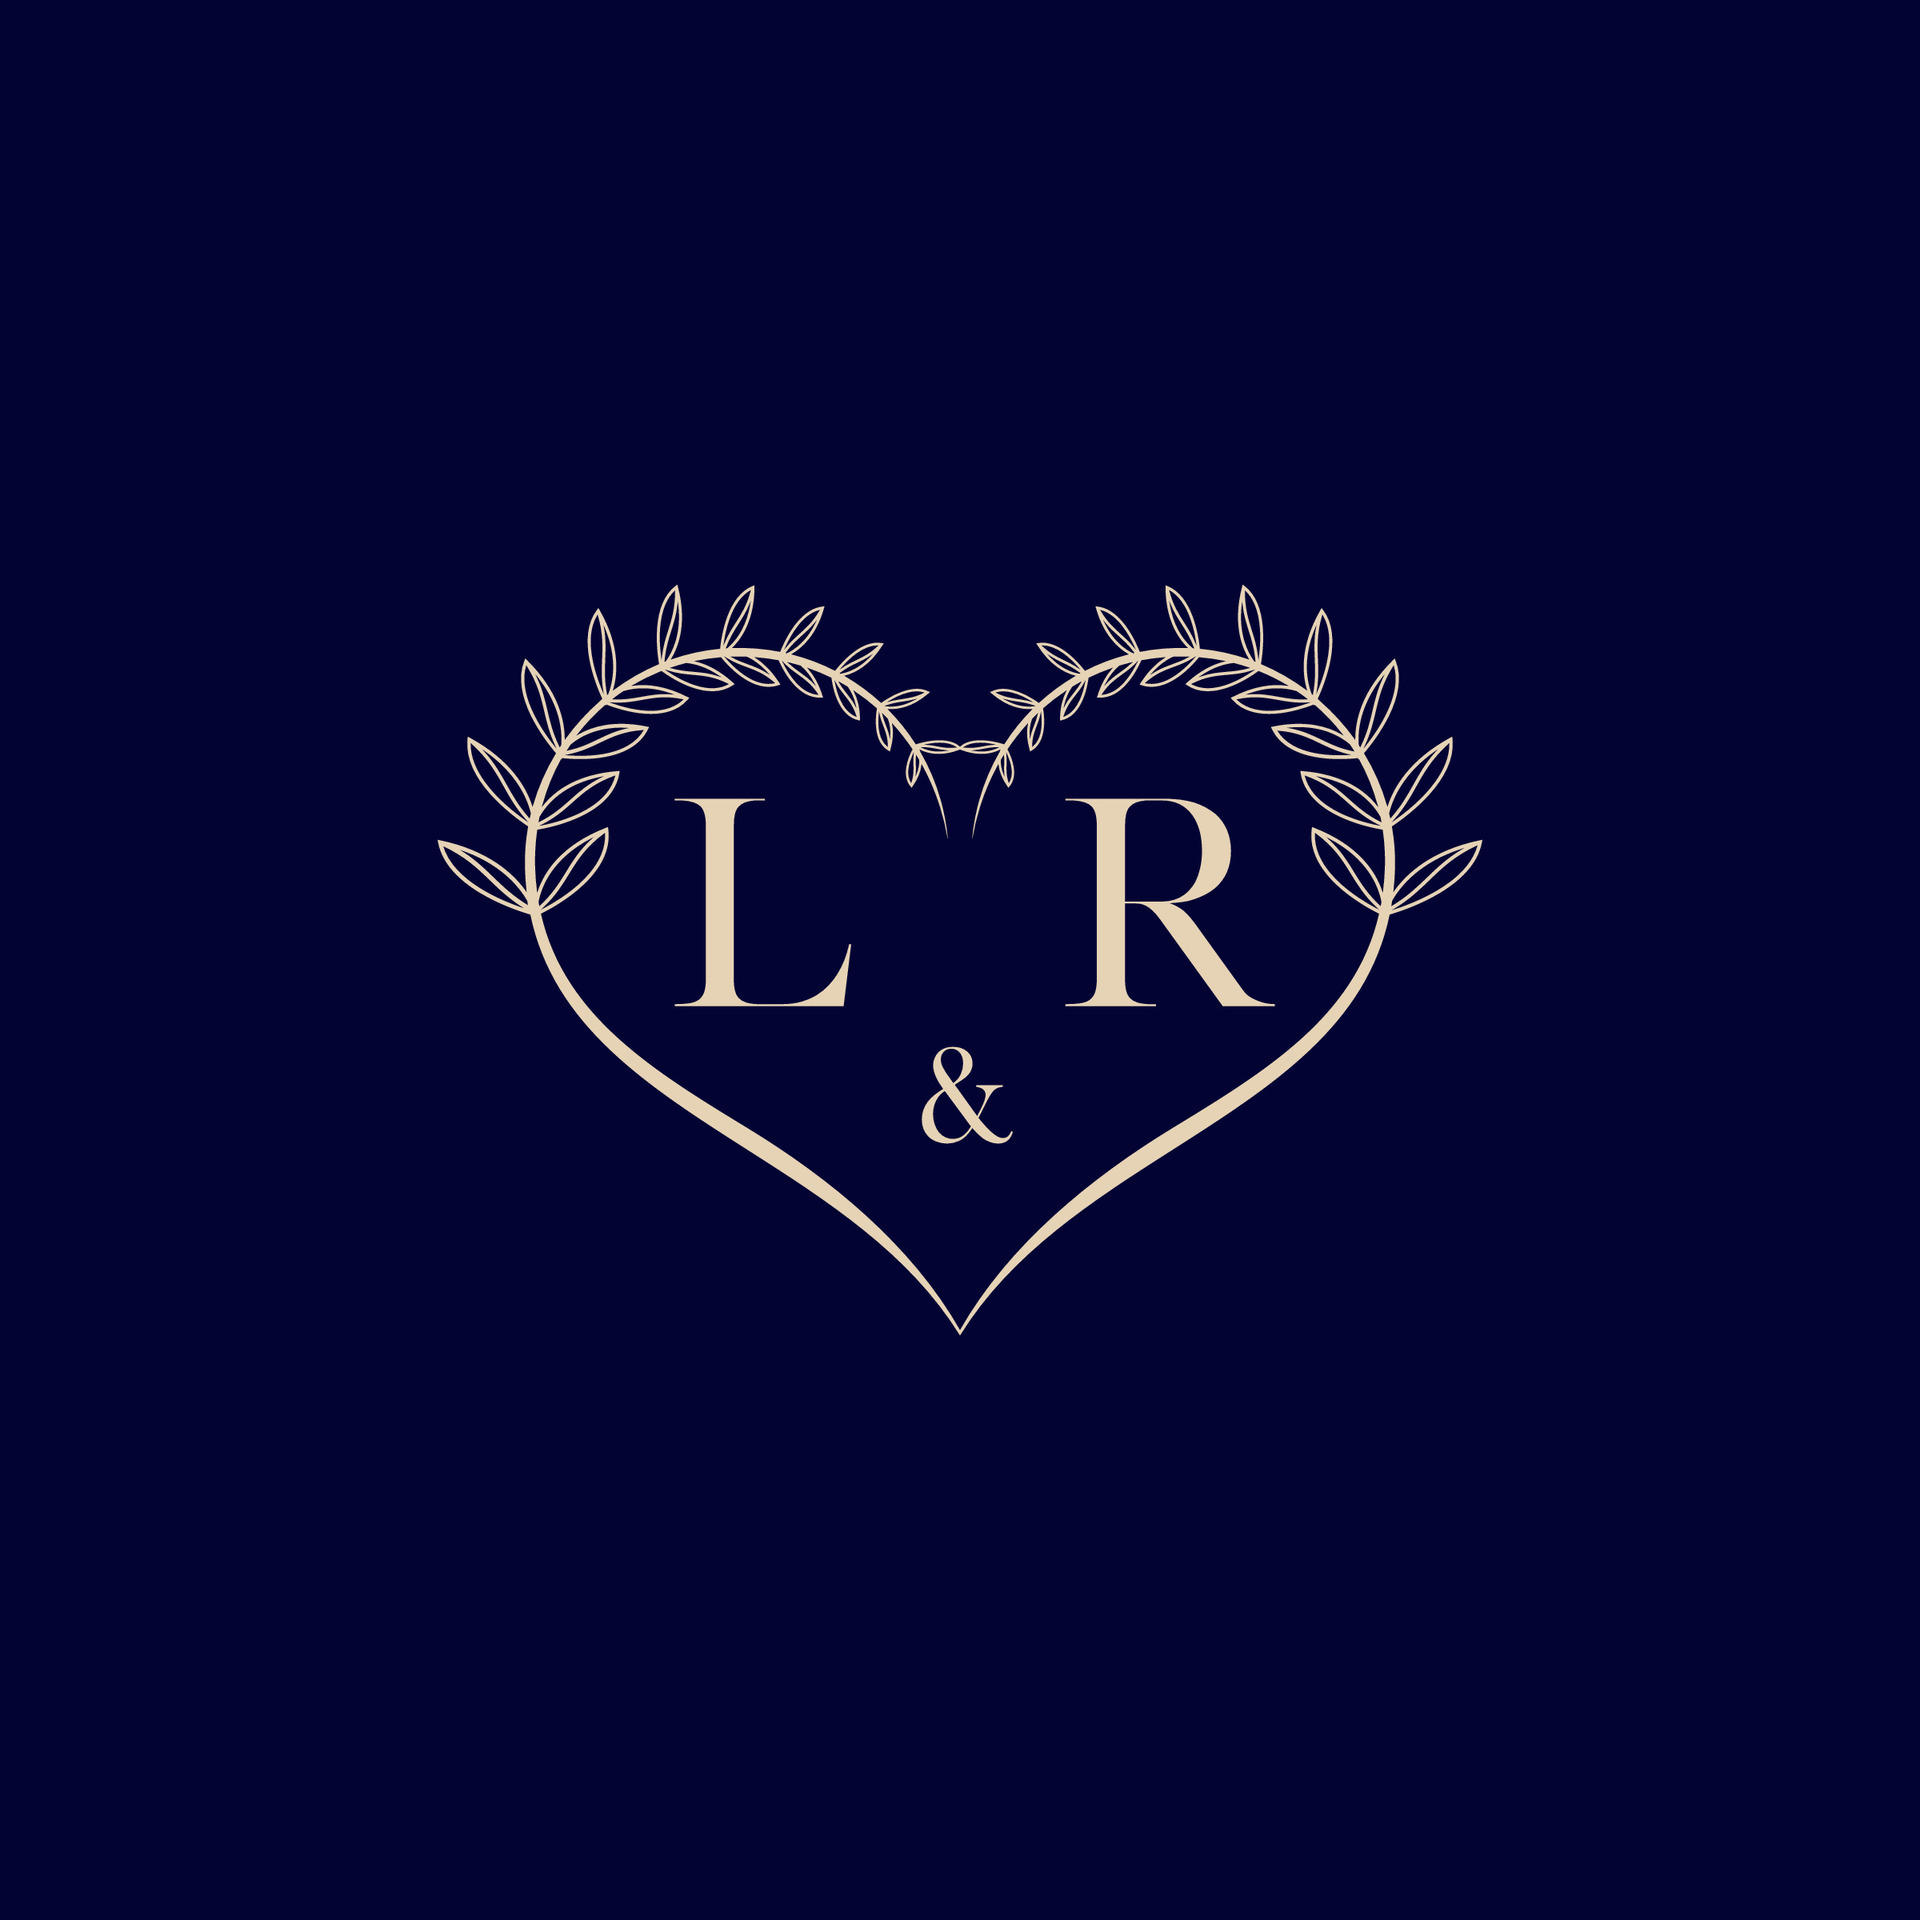 R love logo Vector Clipart Illustrations. 535 R love logo clip art vector  EPS drawings available to search from thousands of royalty free  illustrators.